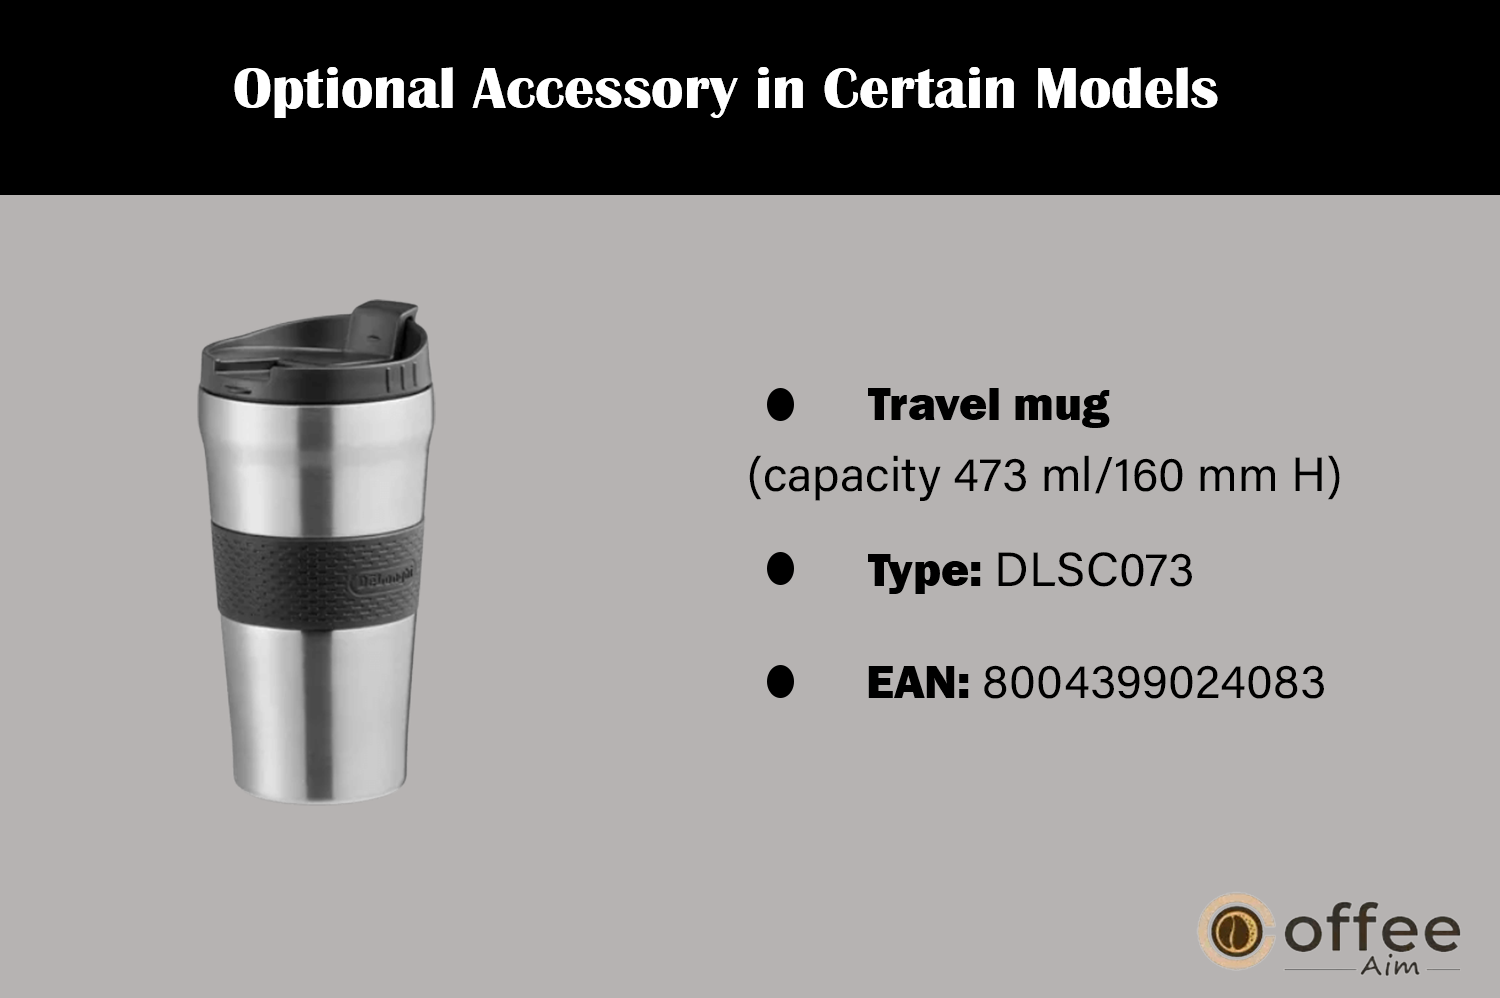 The image highlights an optional accessory available in specific models of the "Delonghi Eletta Explore Espresso Machine," as discussed in the article "How to Use the Delonghi Eletta Explore Espresso Machine."